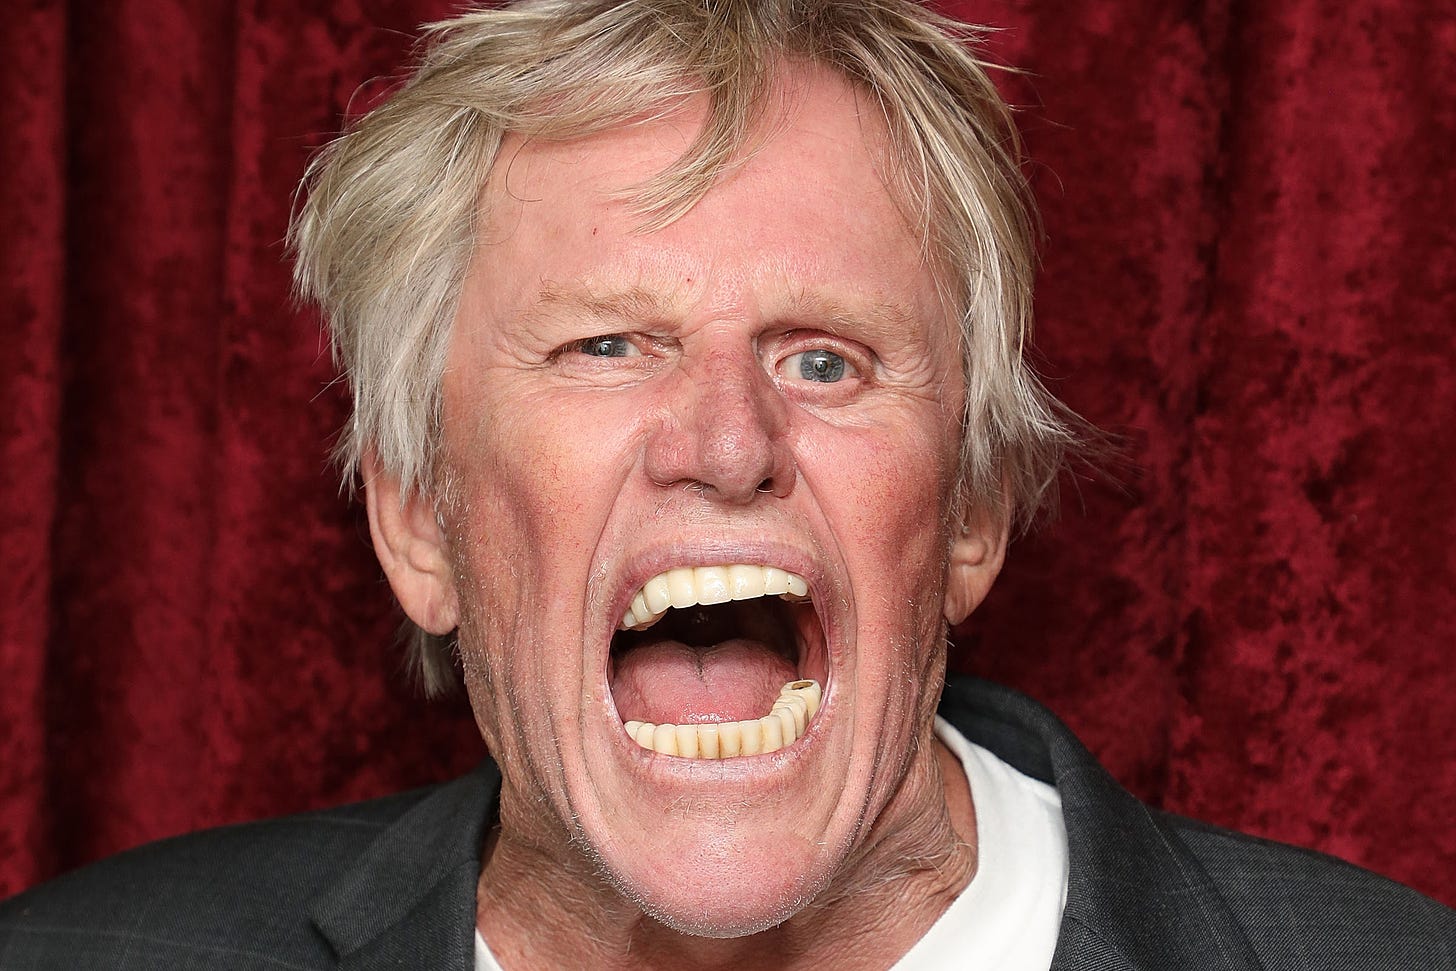 Gary Busey has an odd way of smiling for the camera and more star snaps |  Page Six